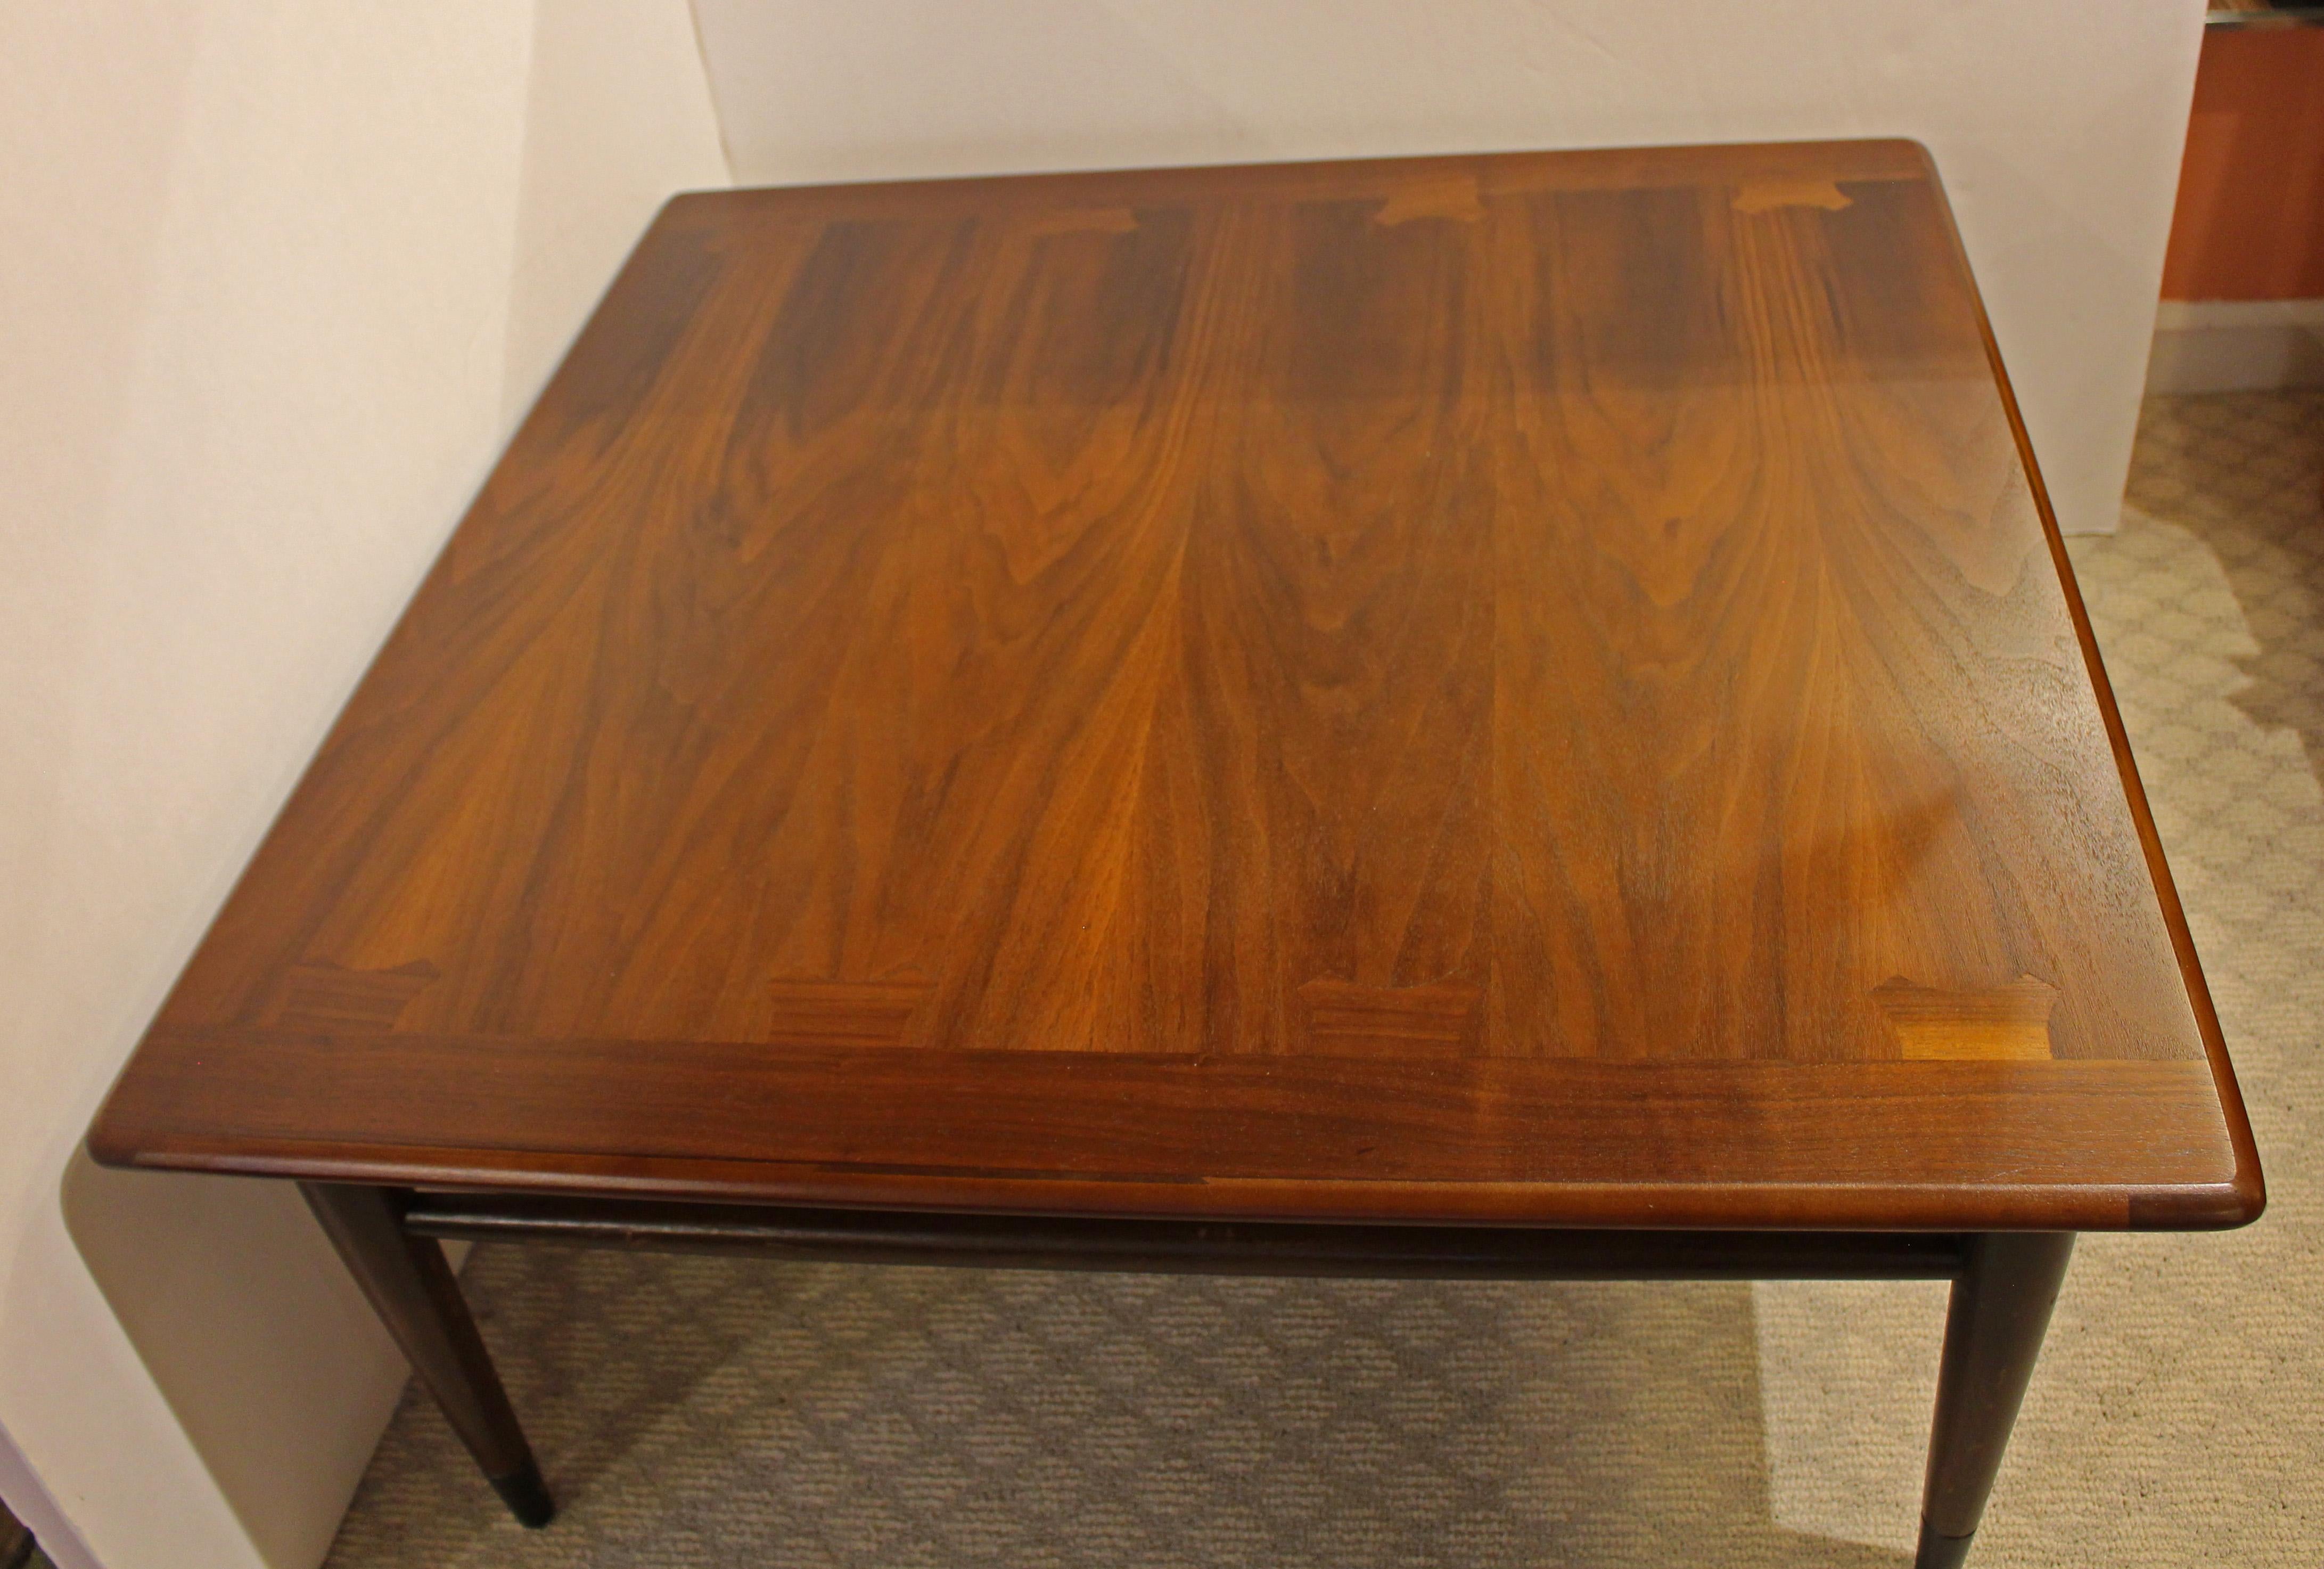 Circa 1960 Mid-Century Modern Square Coffee or Corner Table In Good Condition For Sale In Chapel Hill, NC